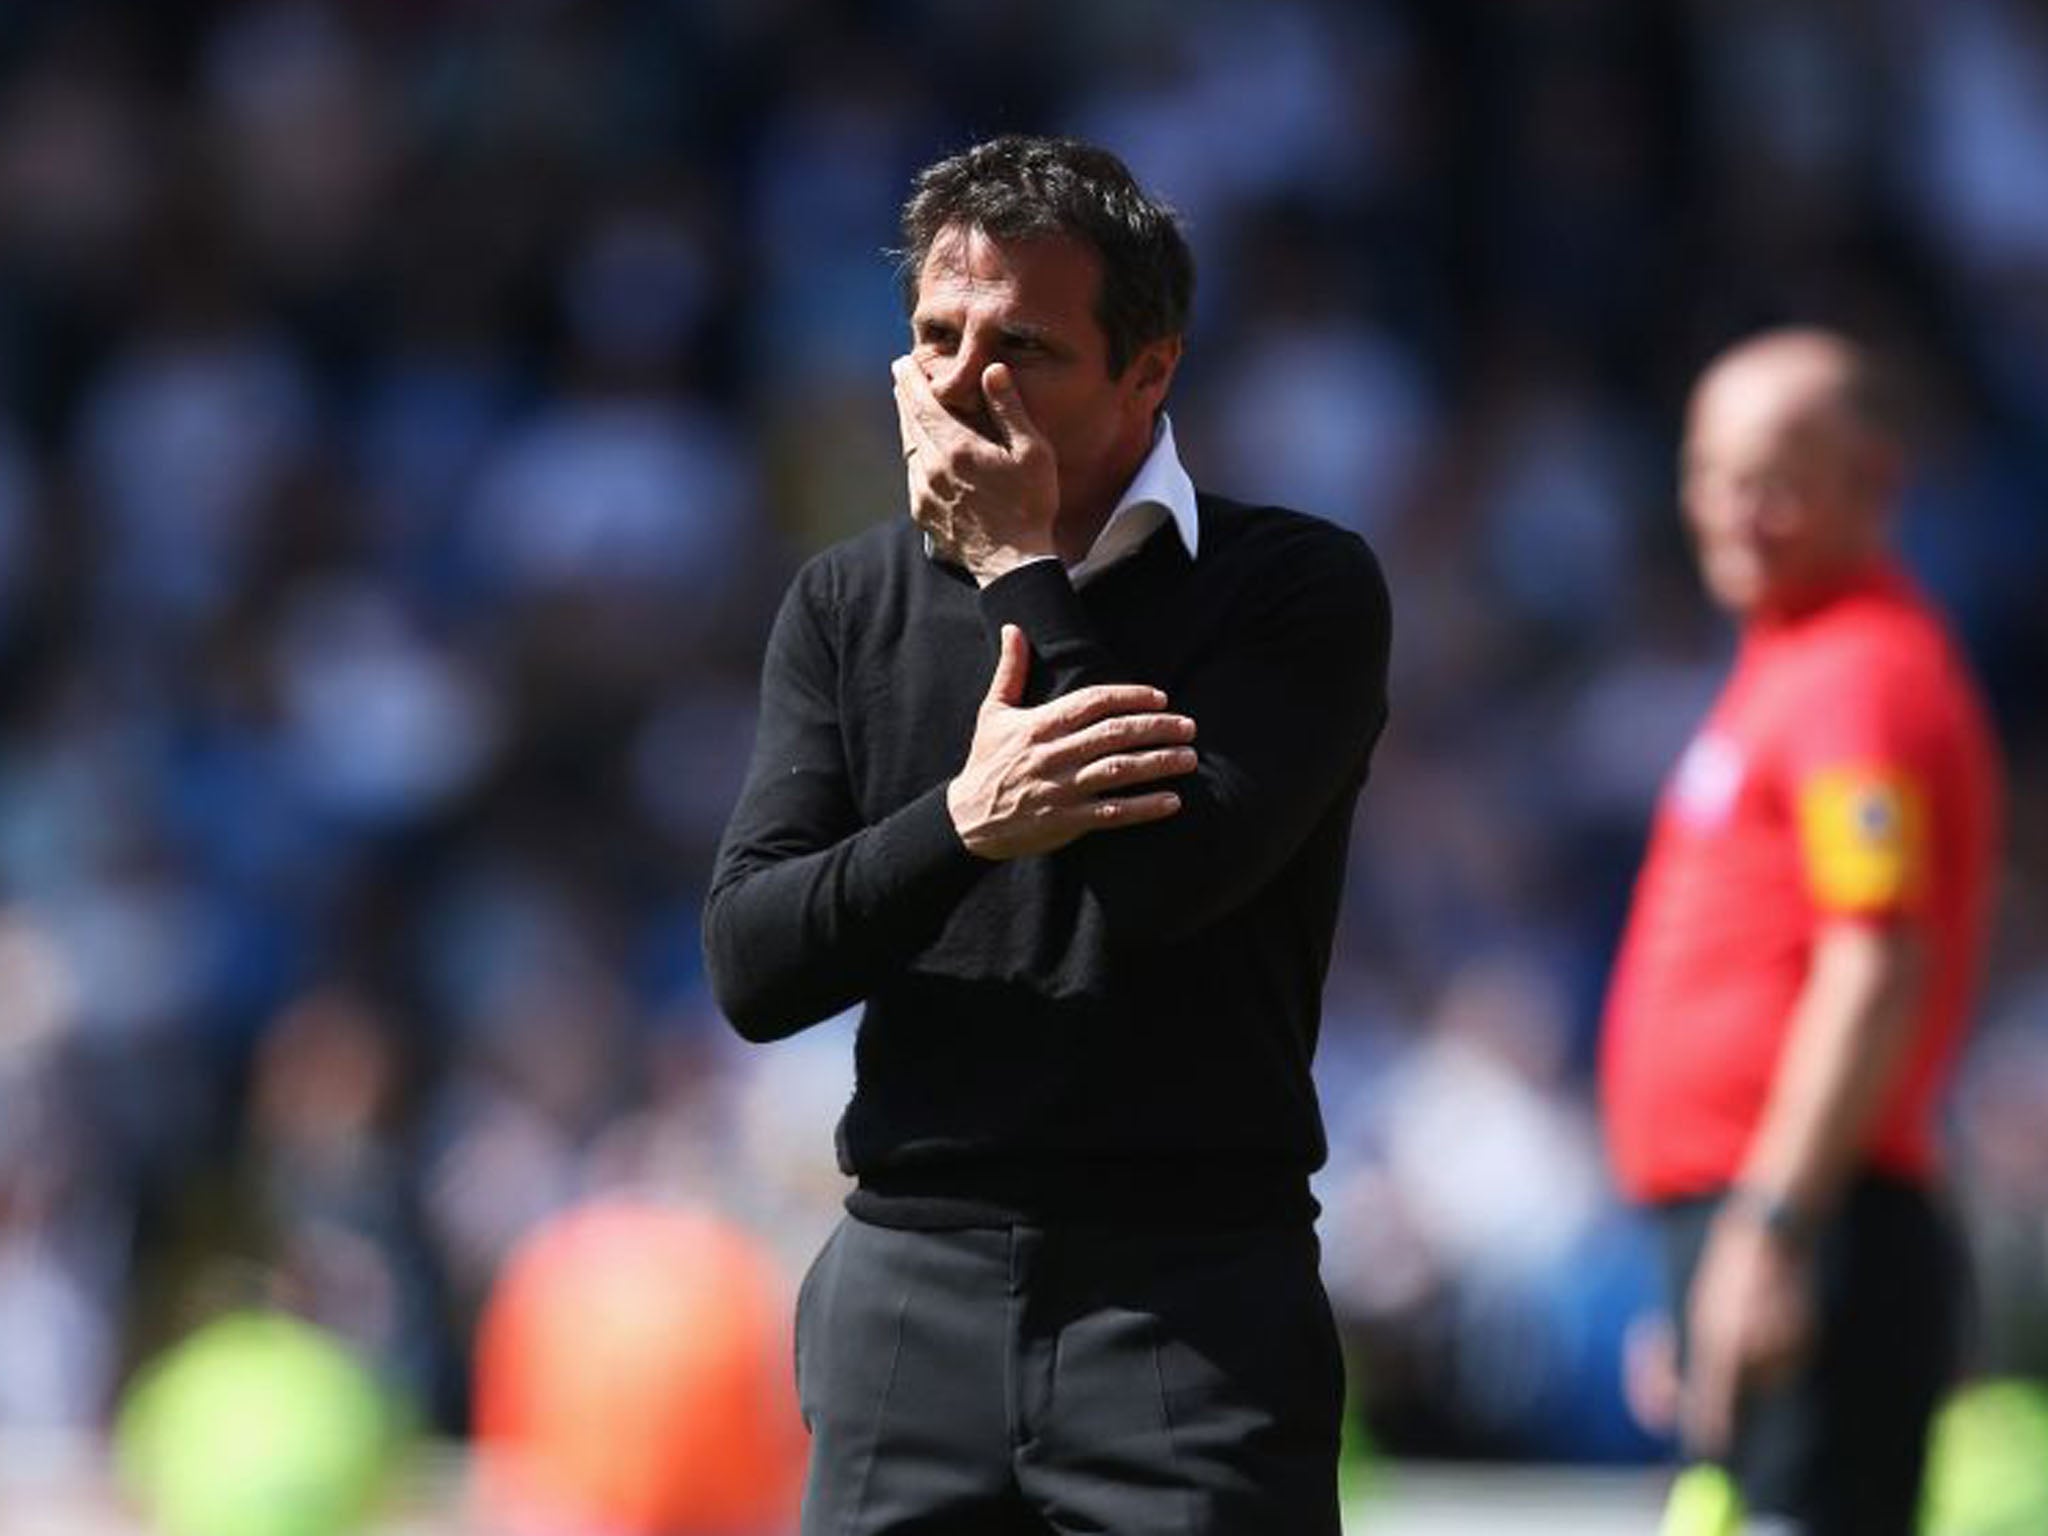 Watford boss Gianfranco Zola was obviously disappointed with the way the after ended, saying that he thought his team “could do it” when they only needed one goal with 15 minutes remaining (Richard Heathcote/Getty Images)